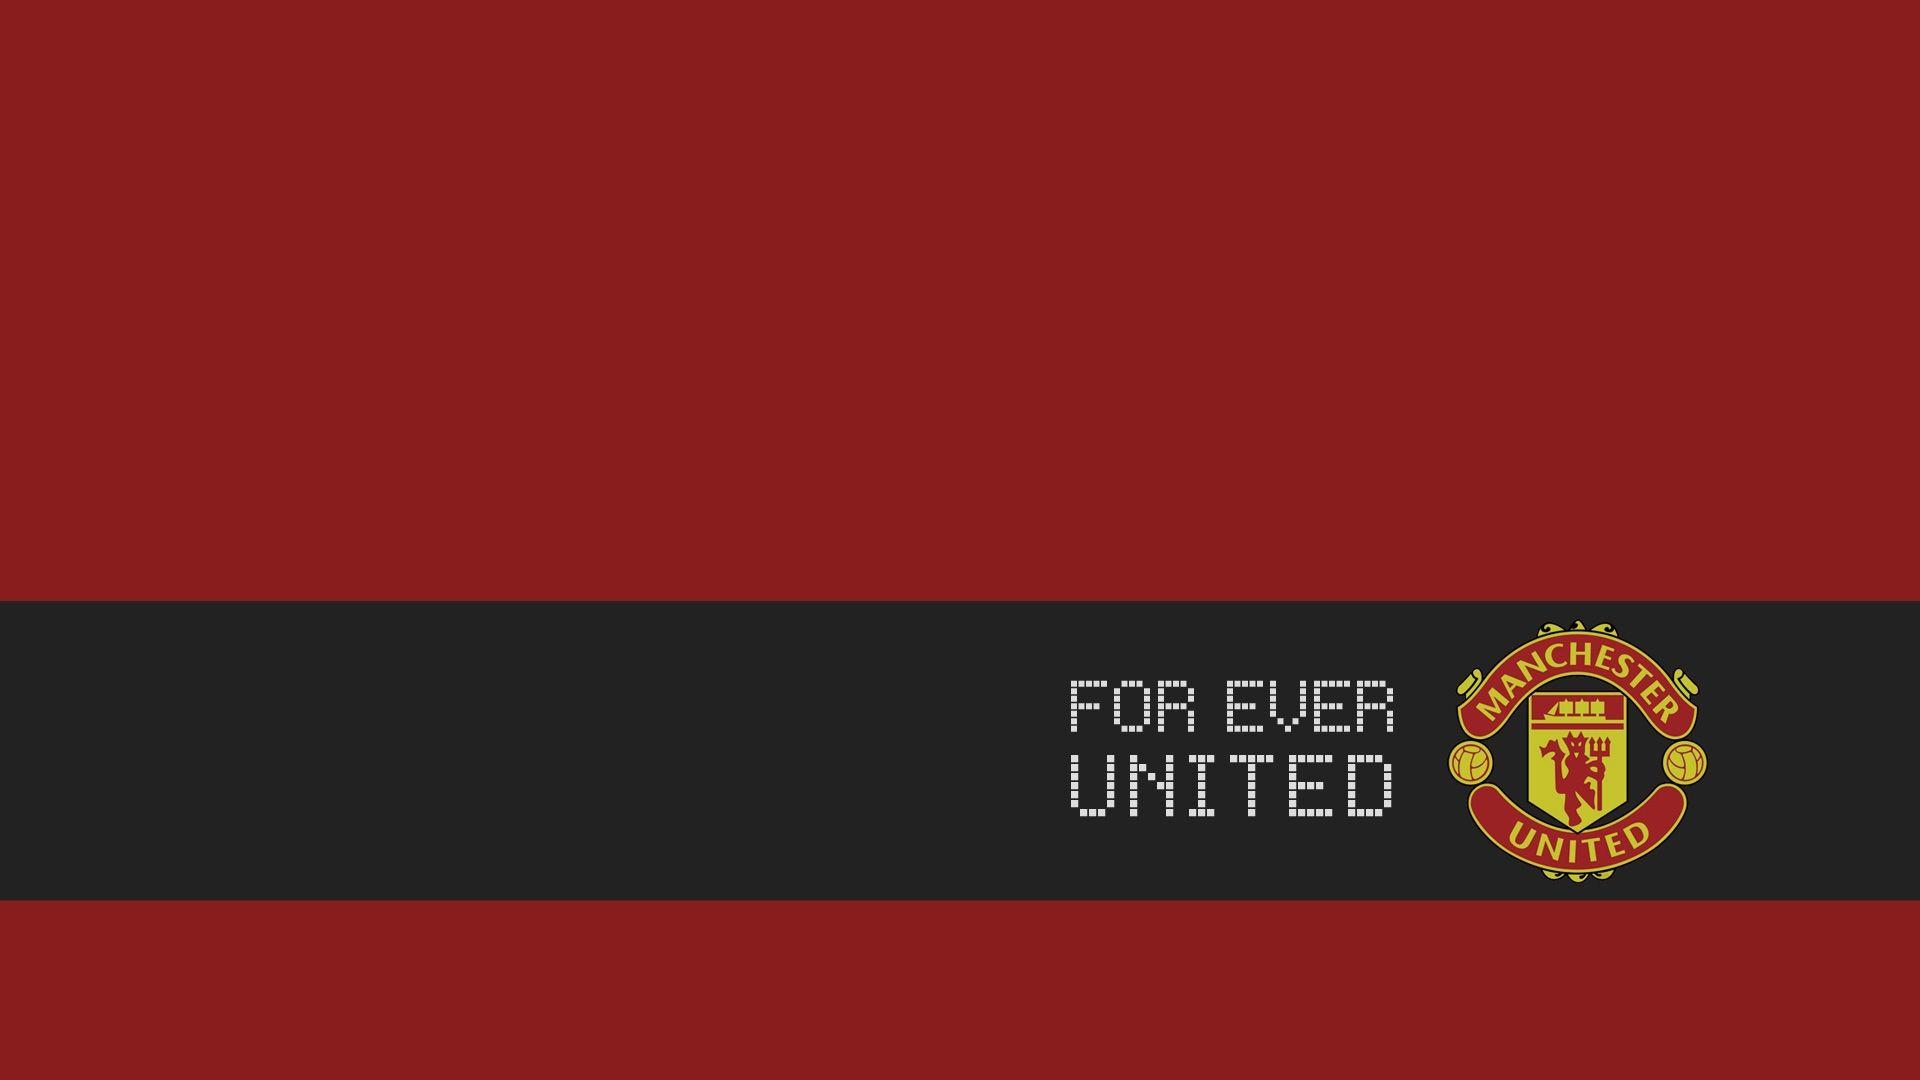 Beautiful Manchester United Wallpaper Pc. Great Foofball Club